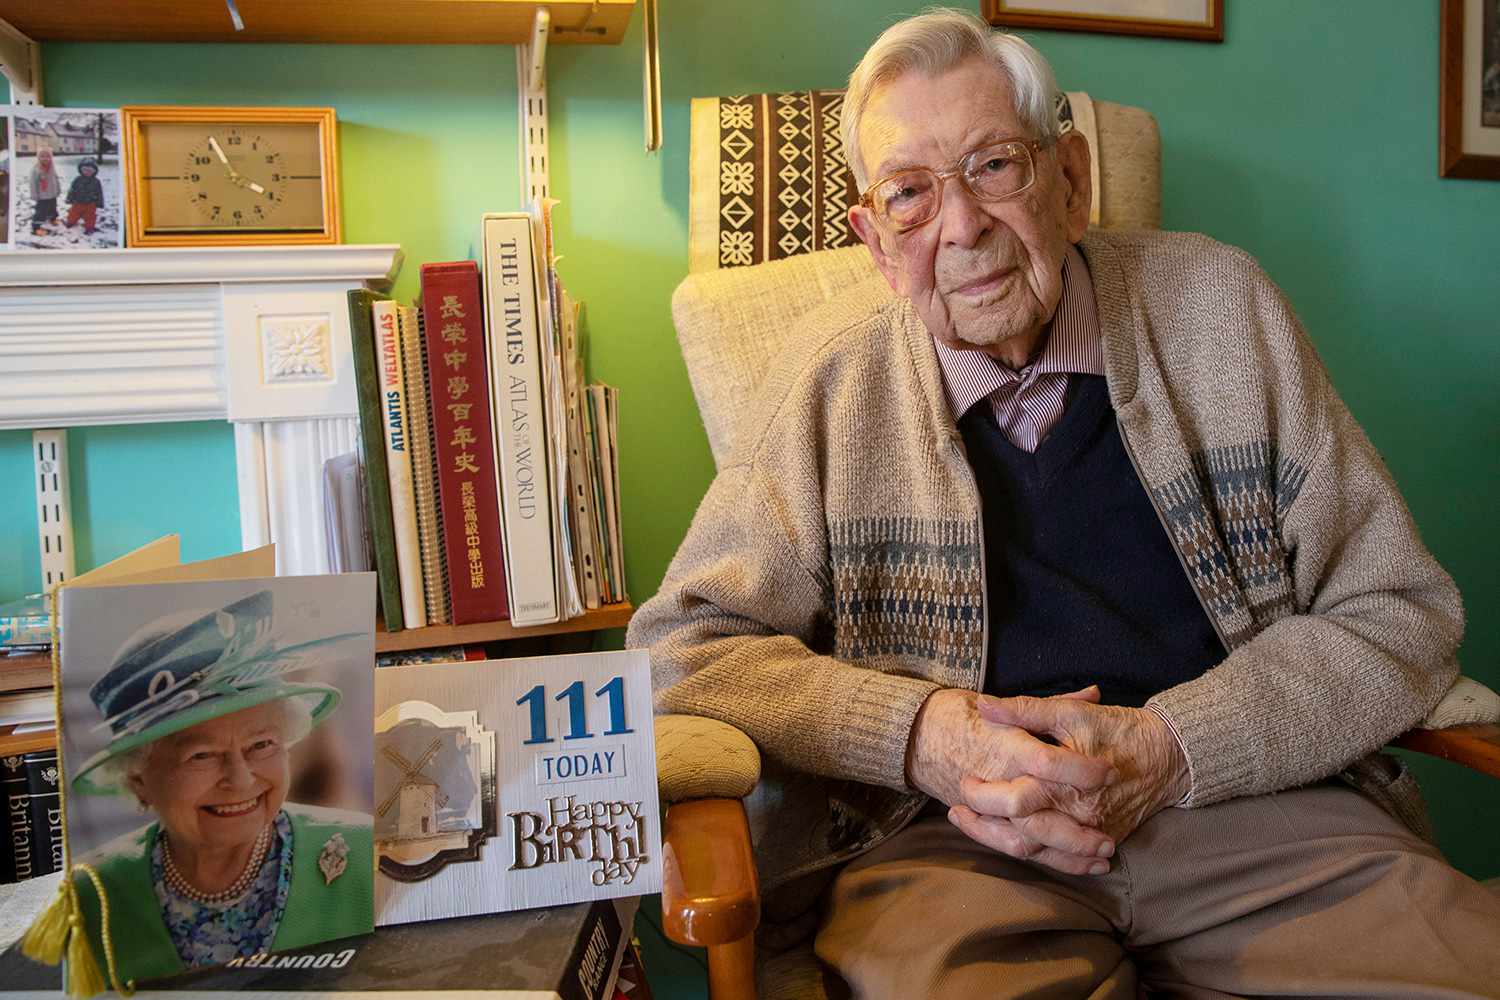 Bob Weighton, from Alton, who turns 111 years old on Friday and is the oldest man in England.